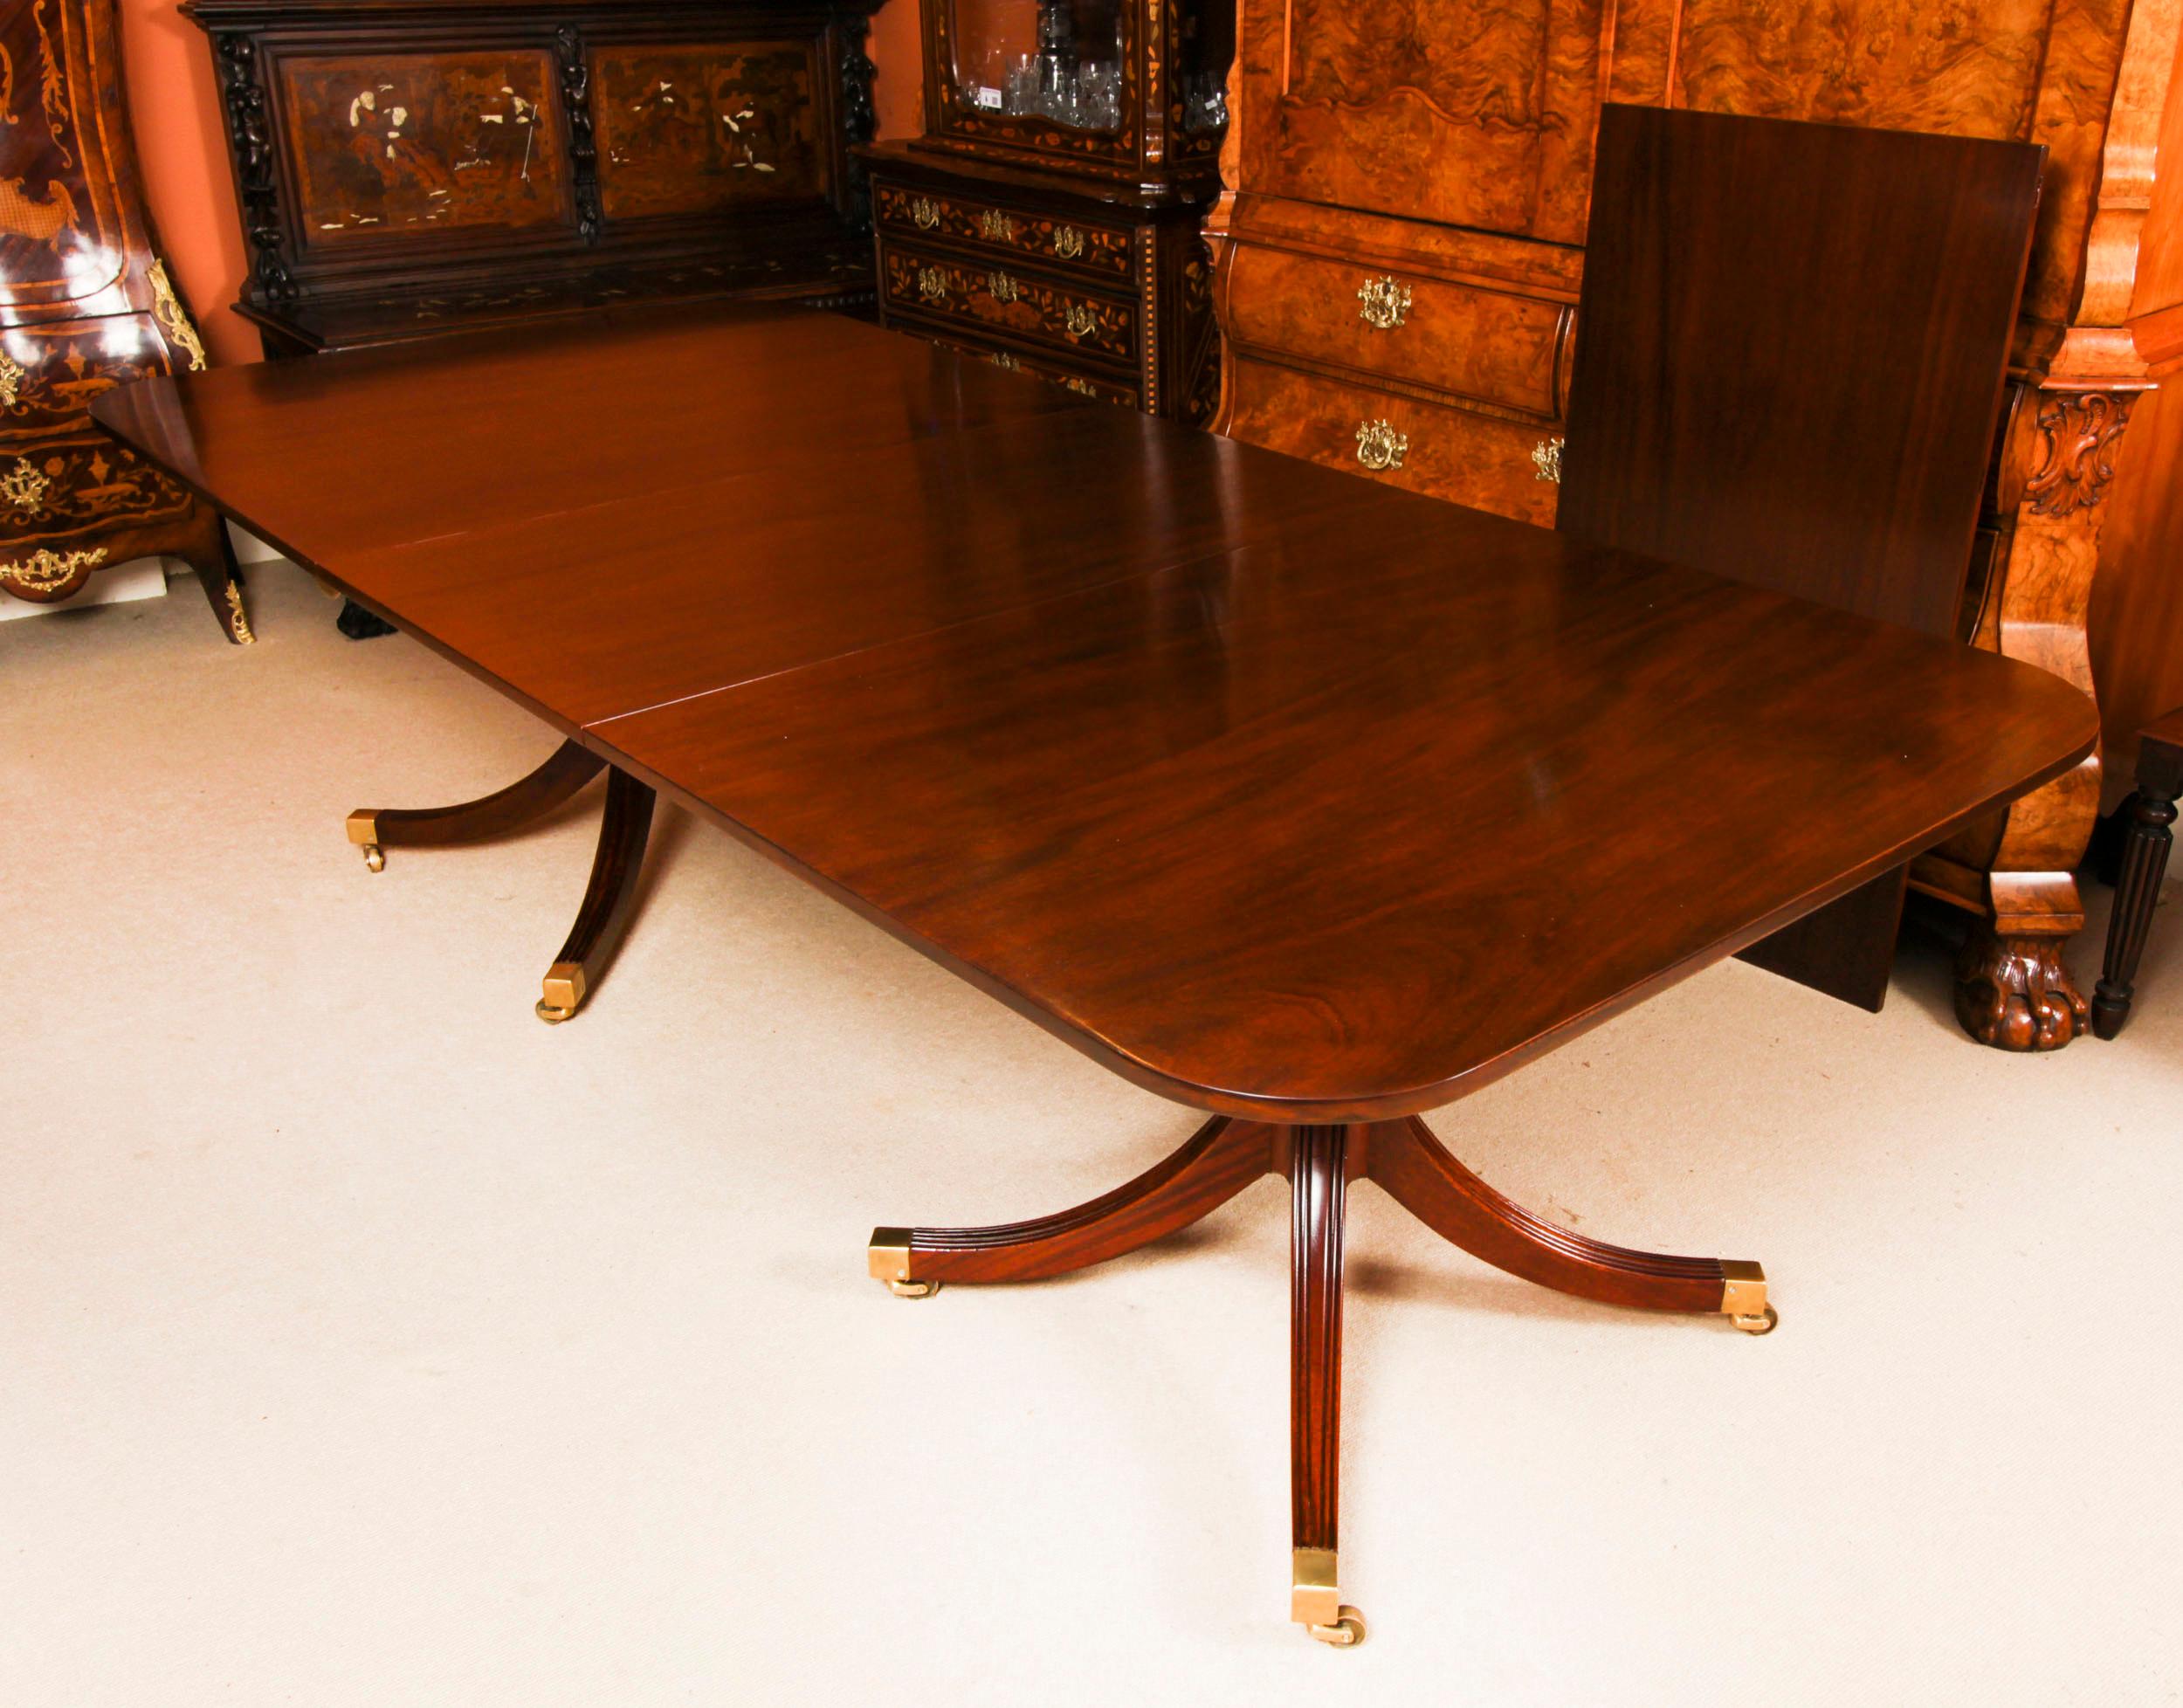 Mahogany Vintage 12ft Dining Table & 12 Wheat Sheaf Chairs by William Tillman 20th C